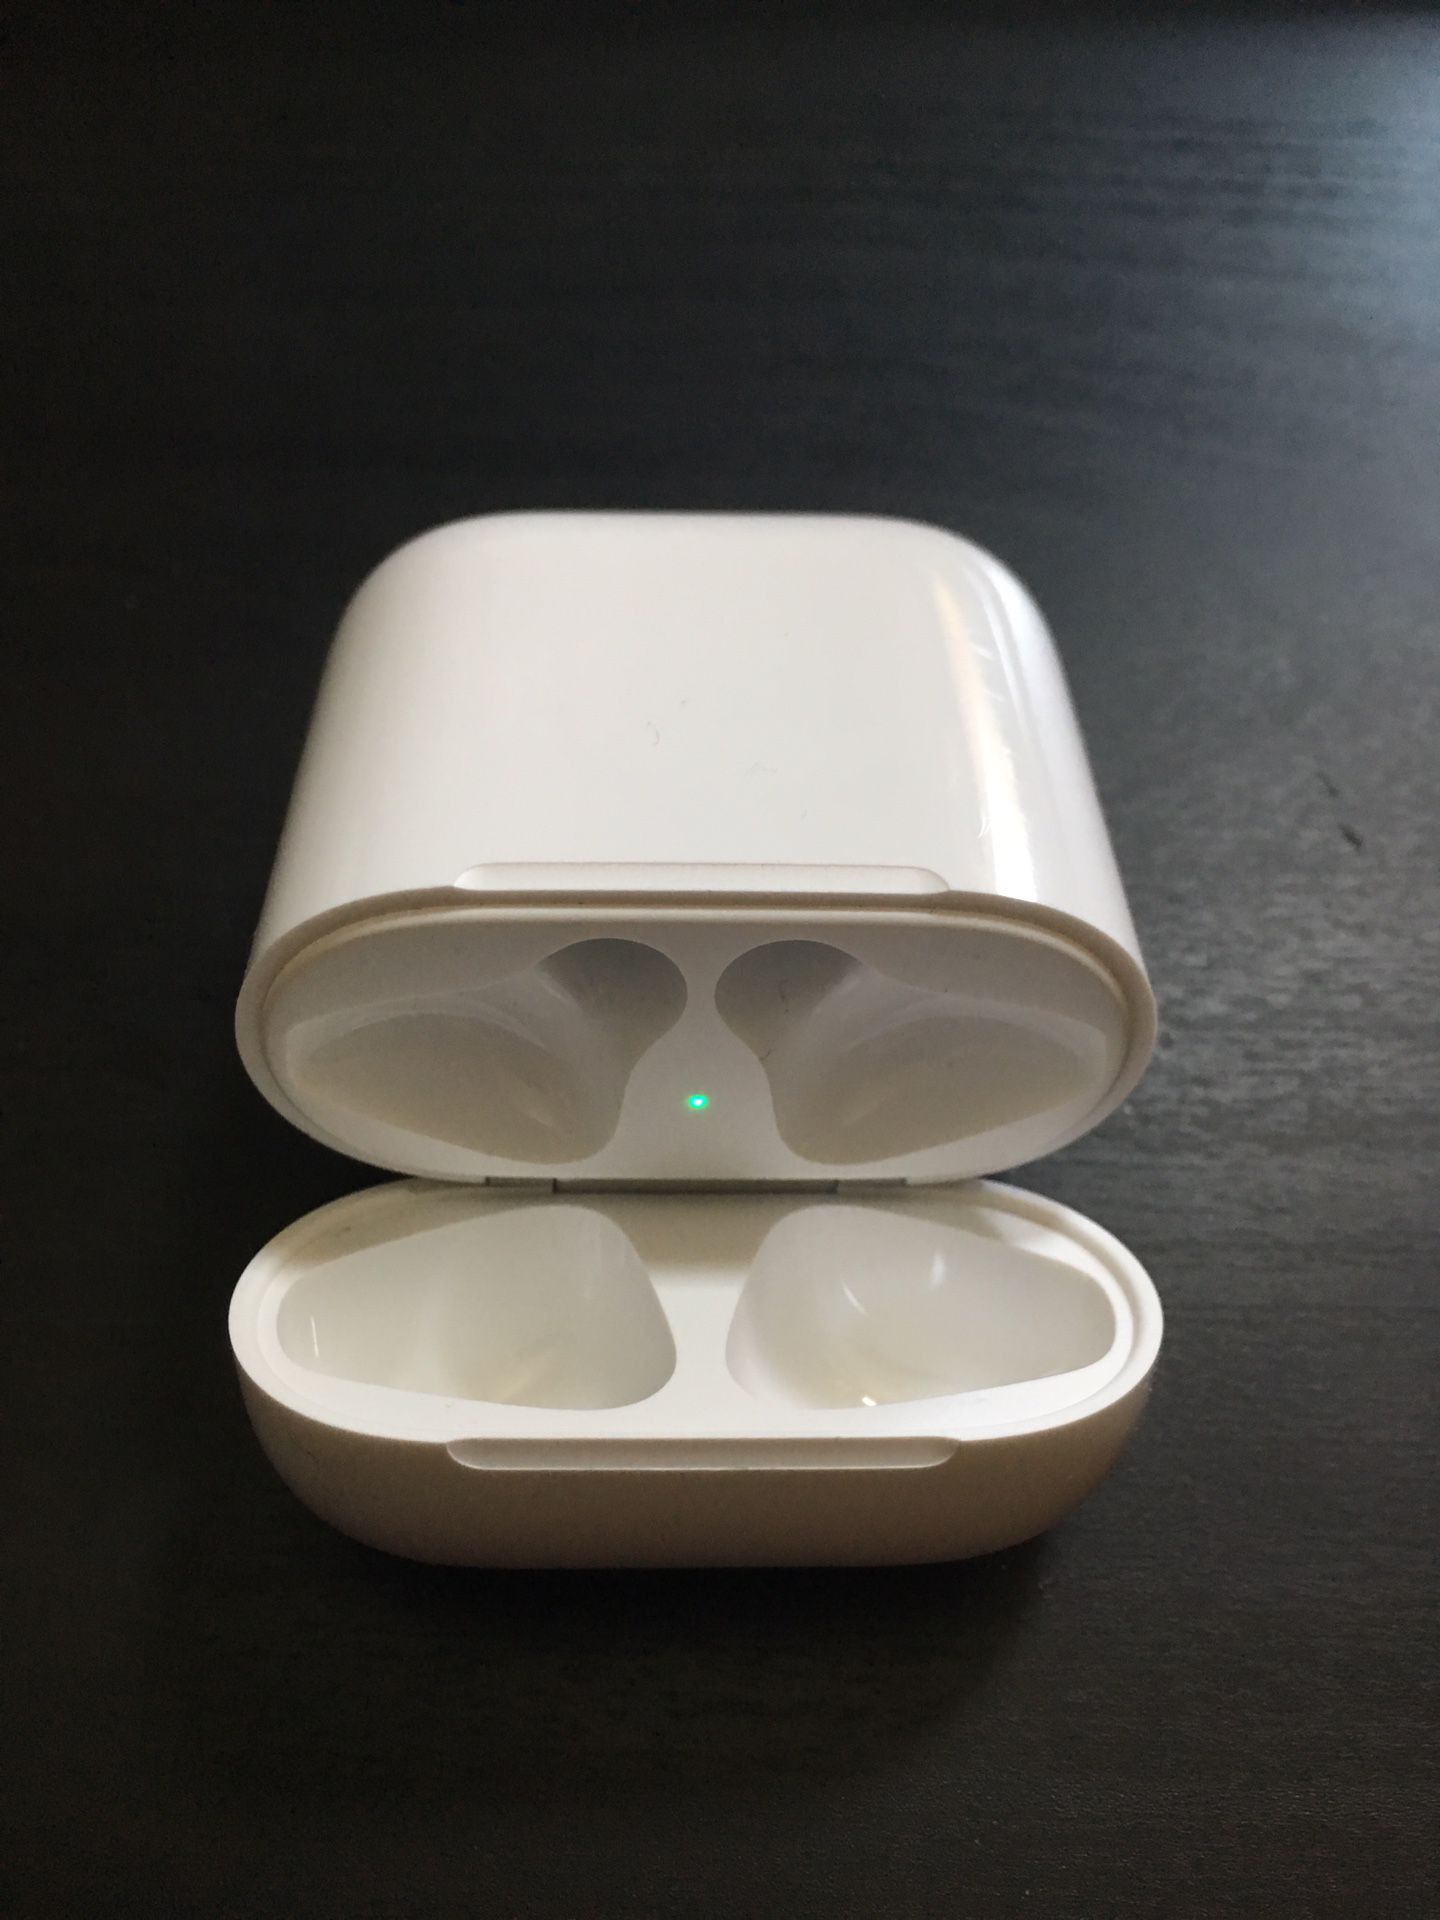 Apple Airpods Charging Case